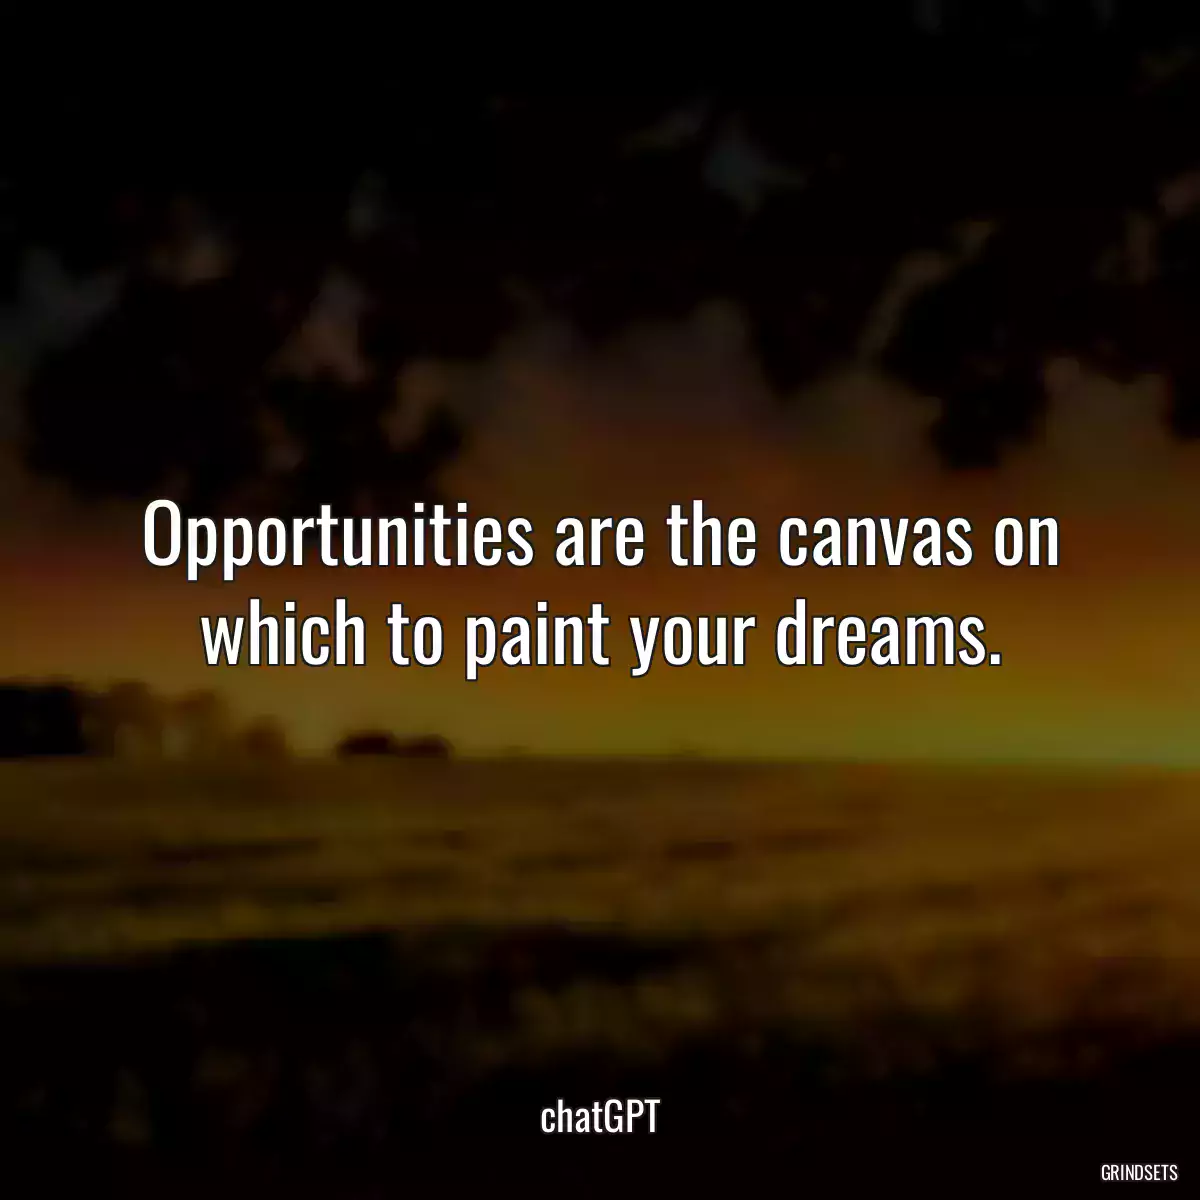 Opportunities are the canvas on which to paint your dreams.